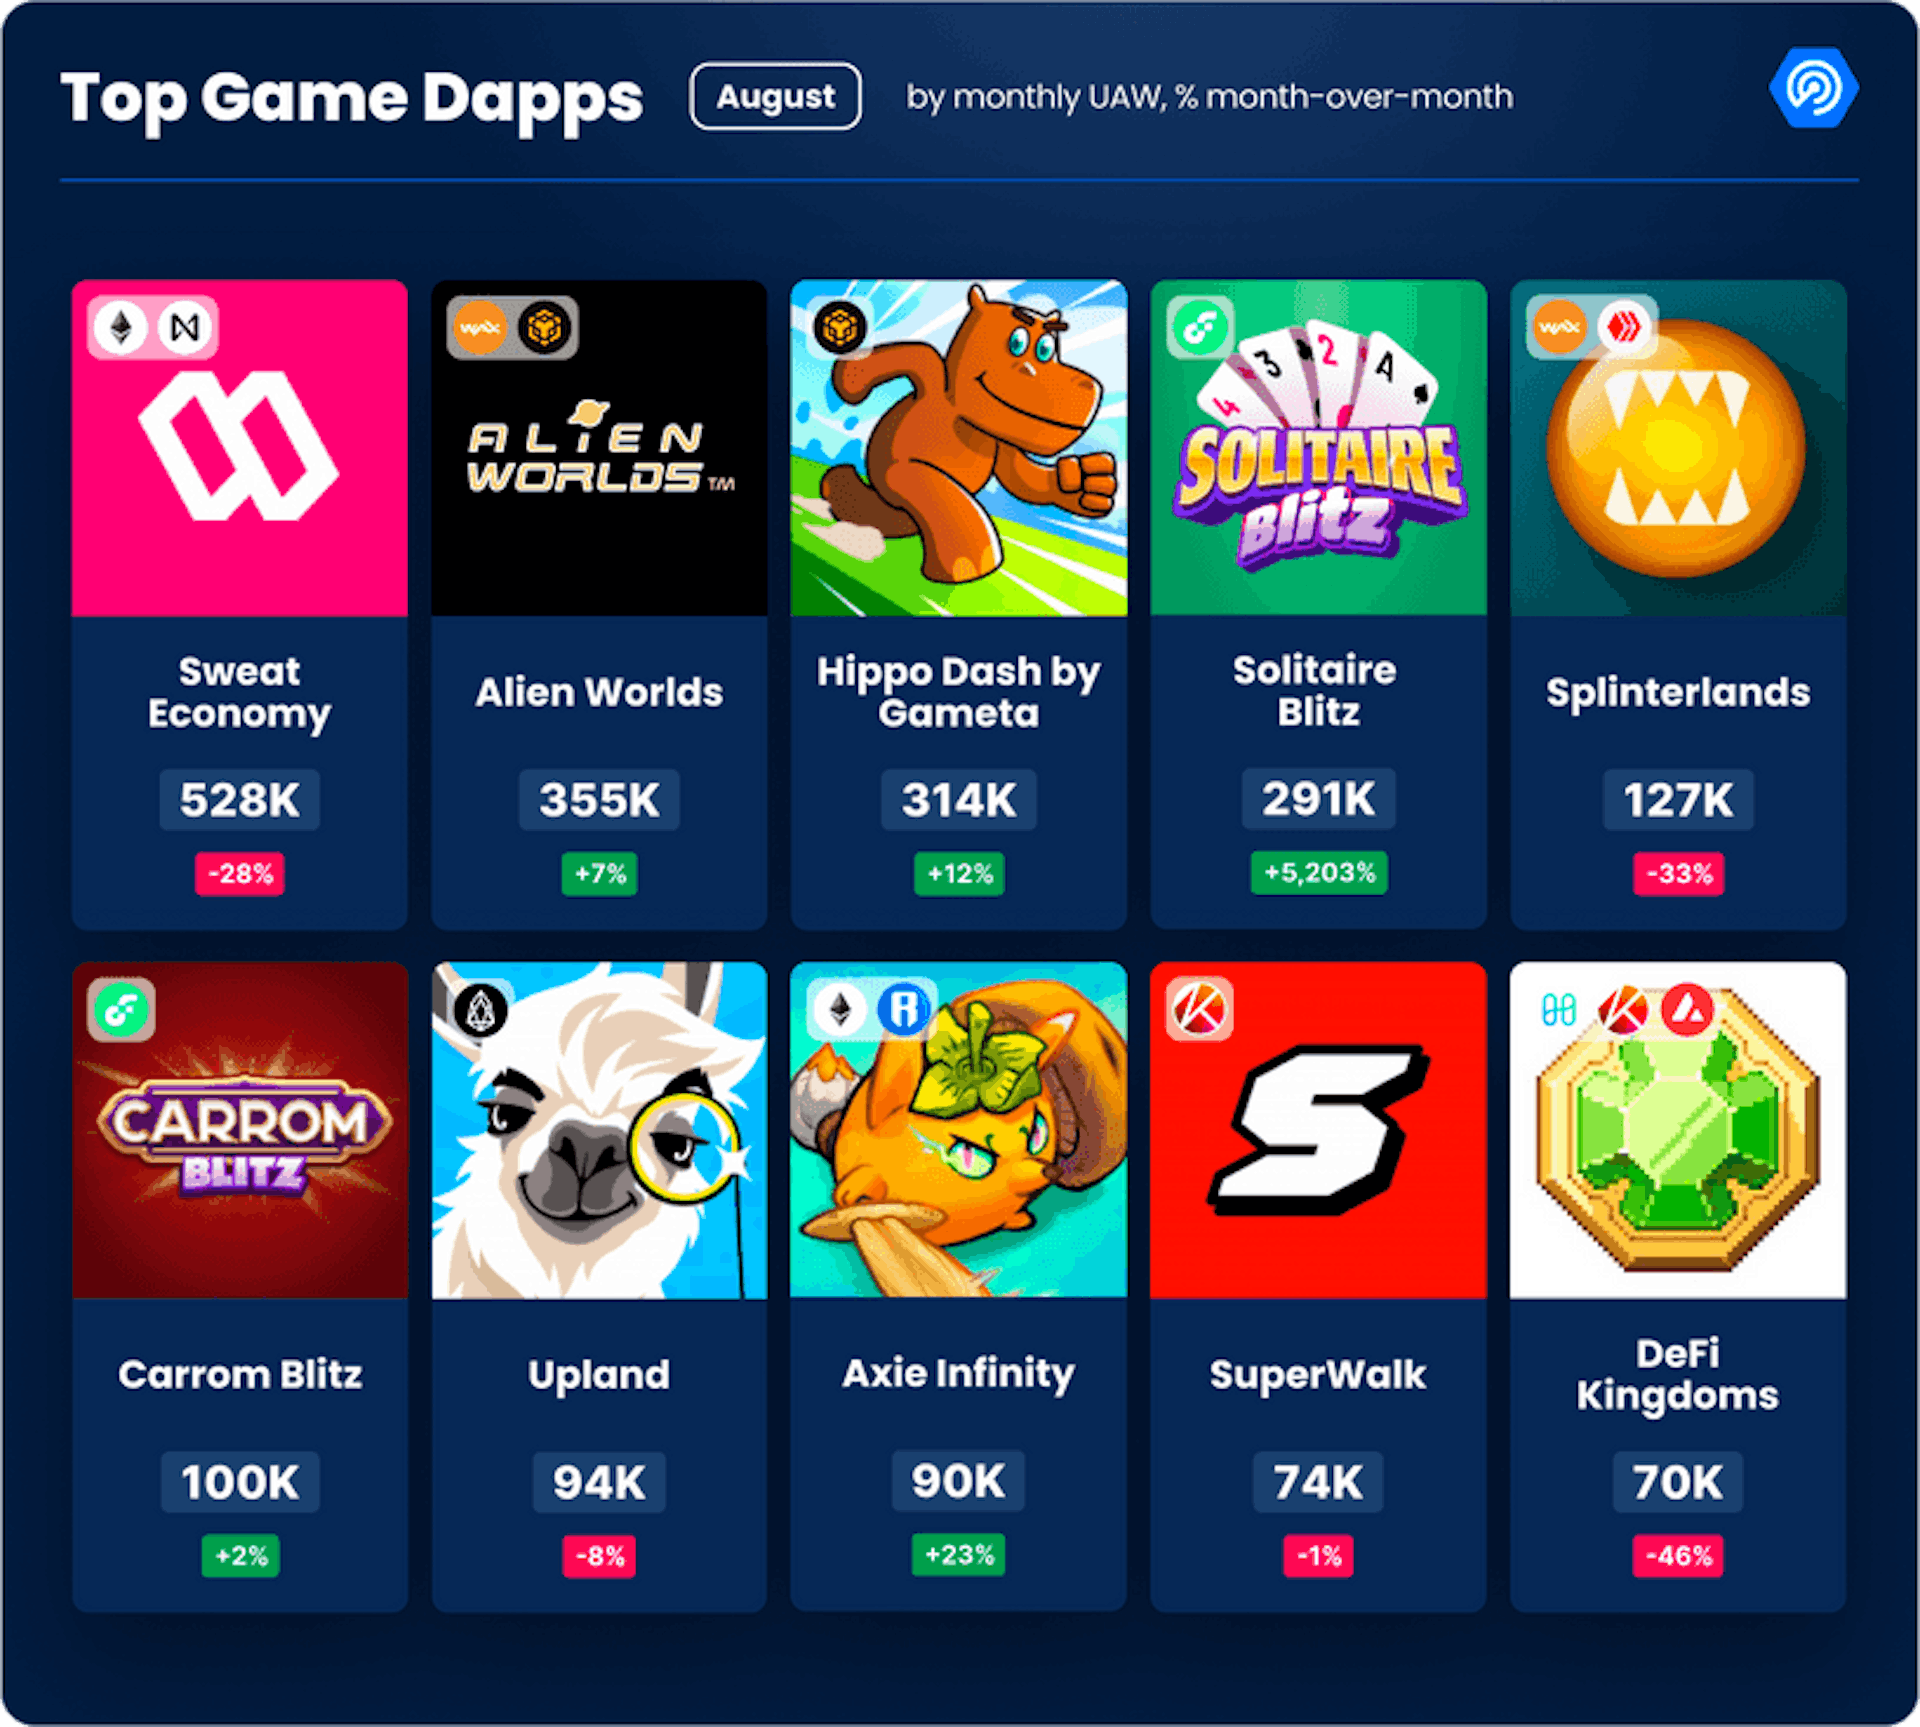 Top Game Dapps